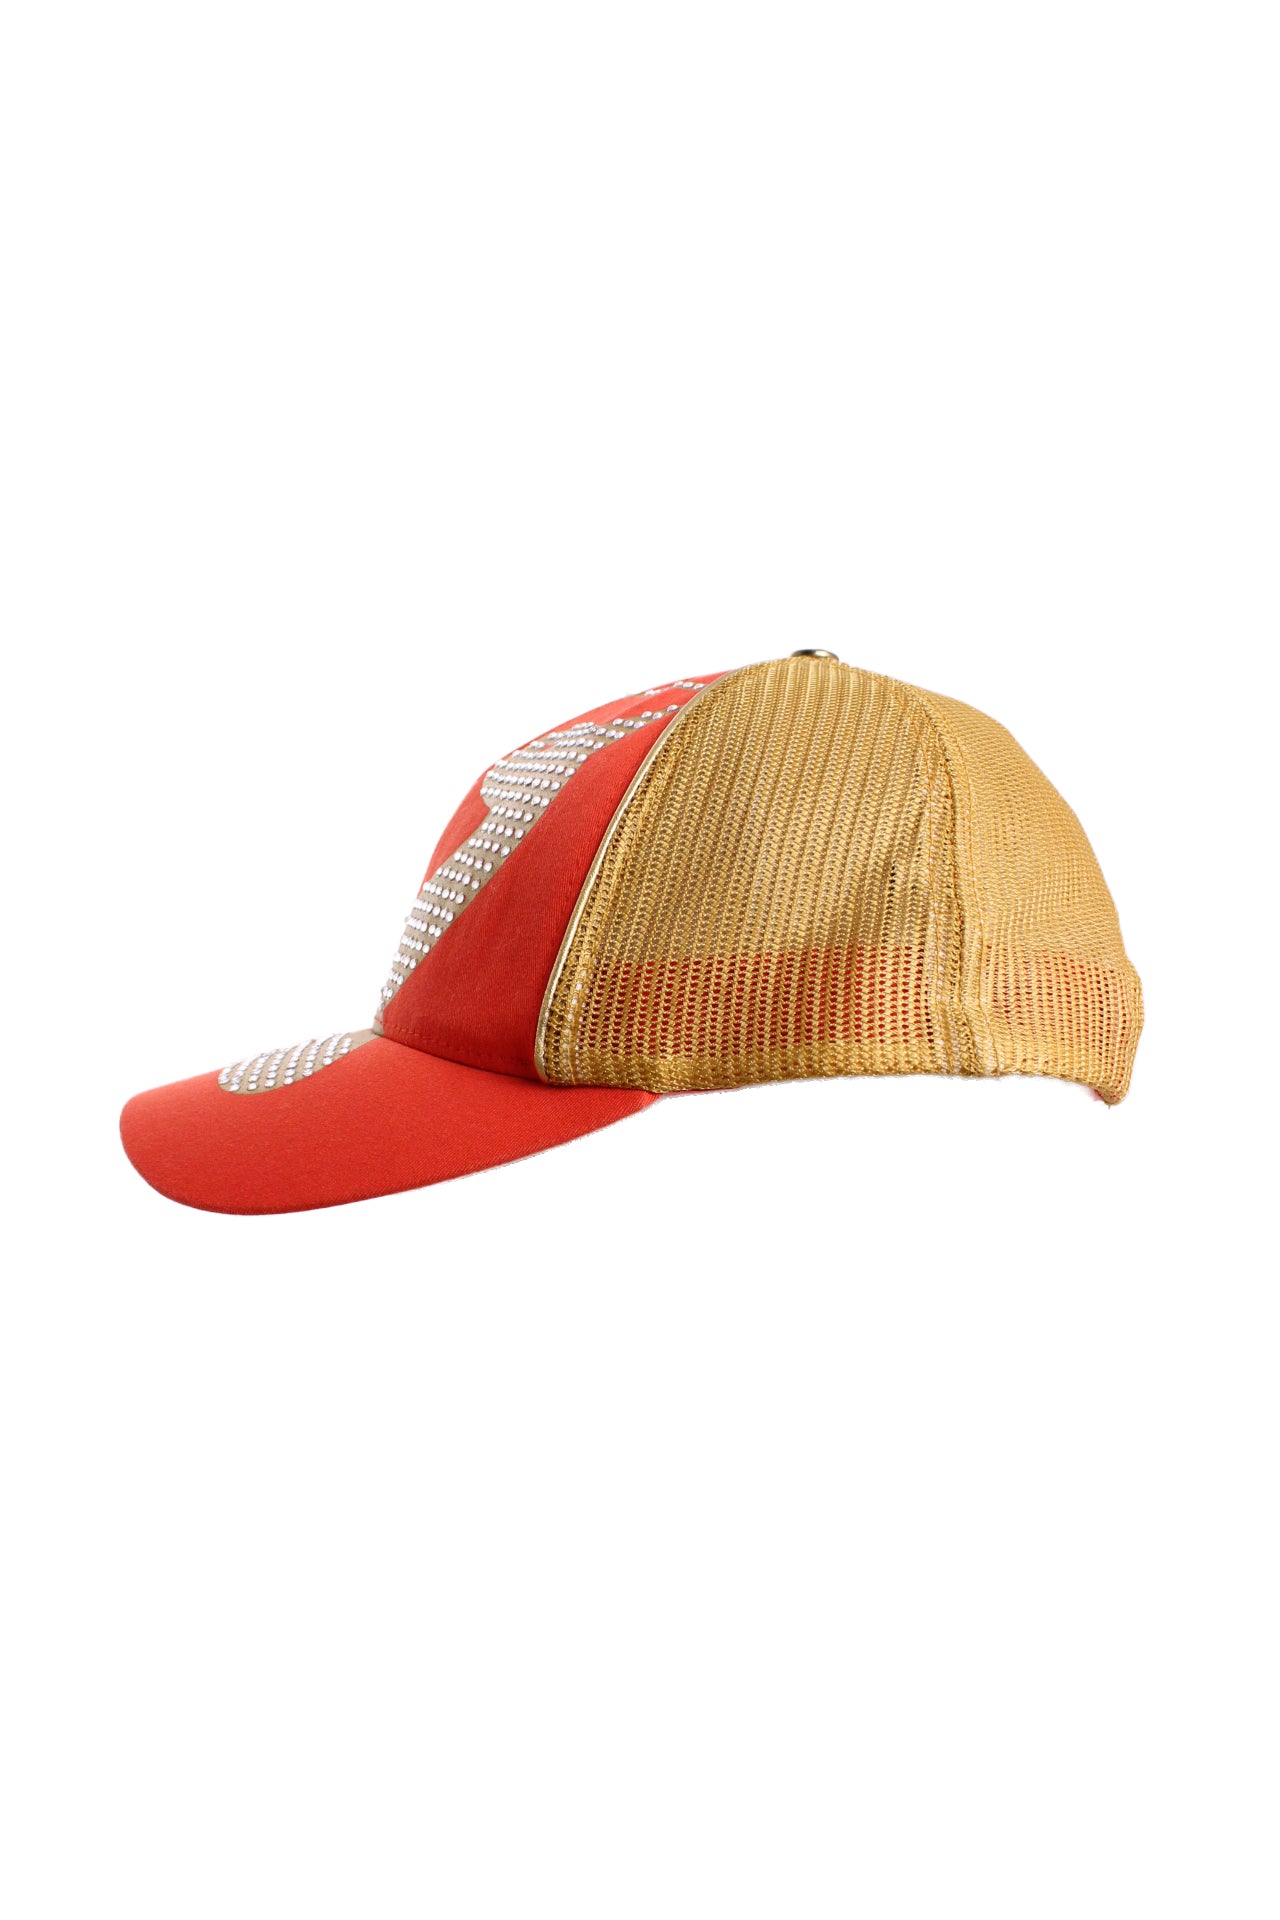 profile of orange trucker hat with gold toned mesh time panels 